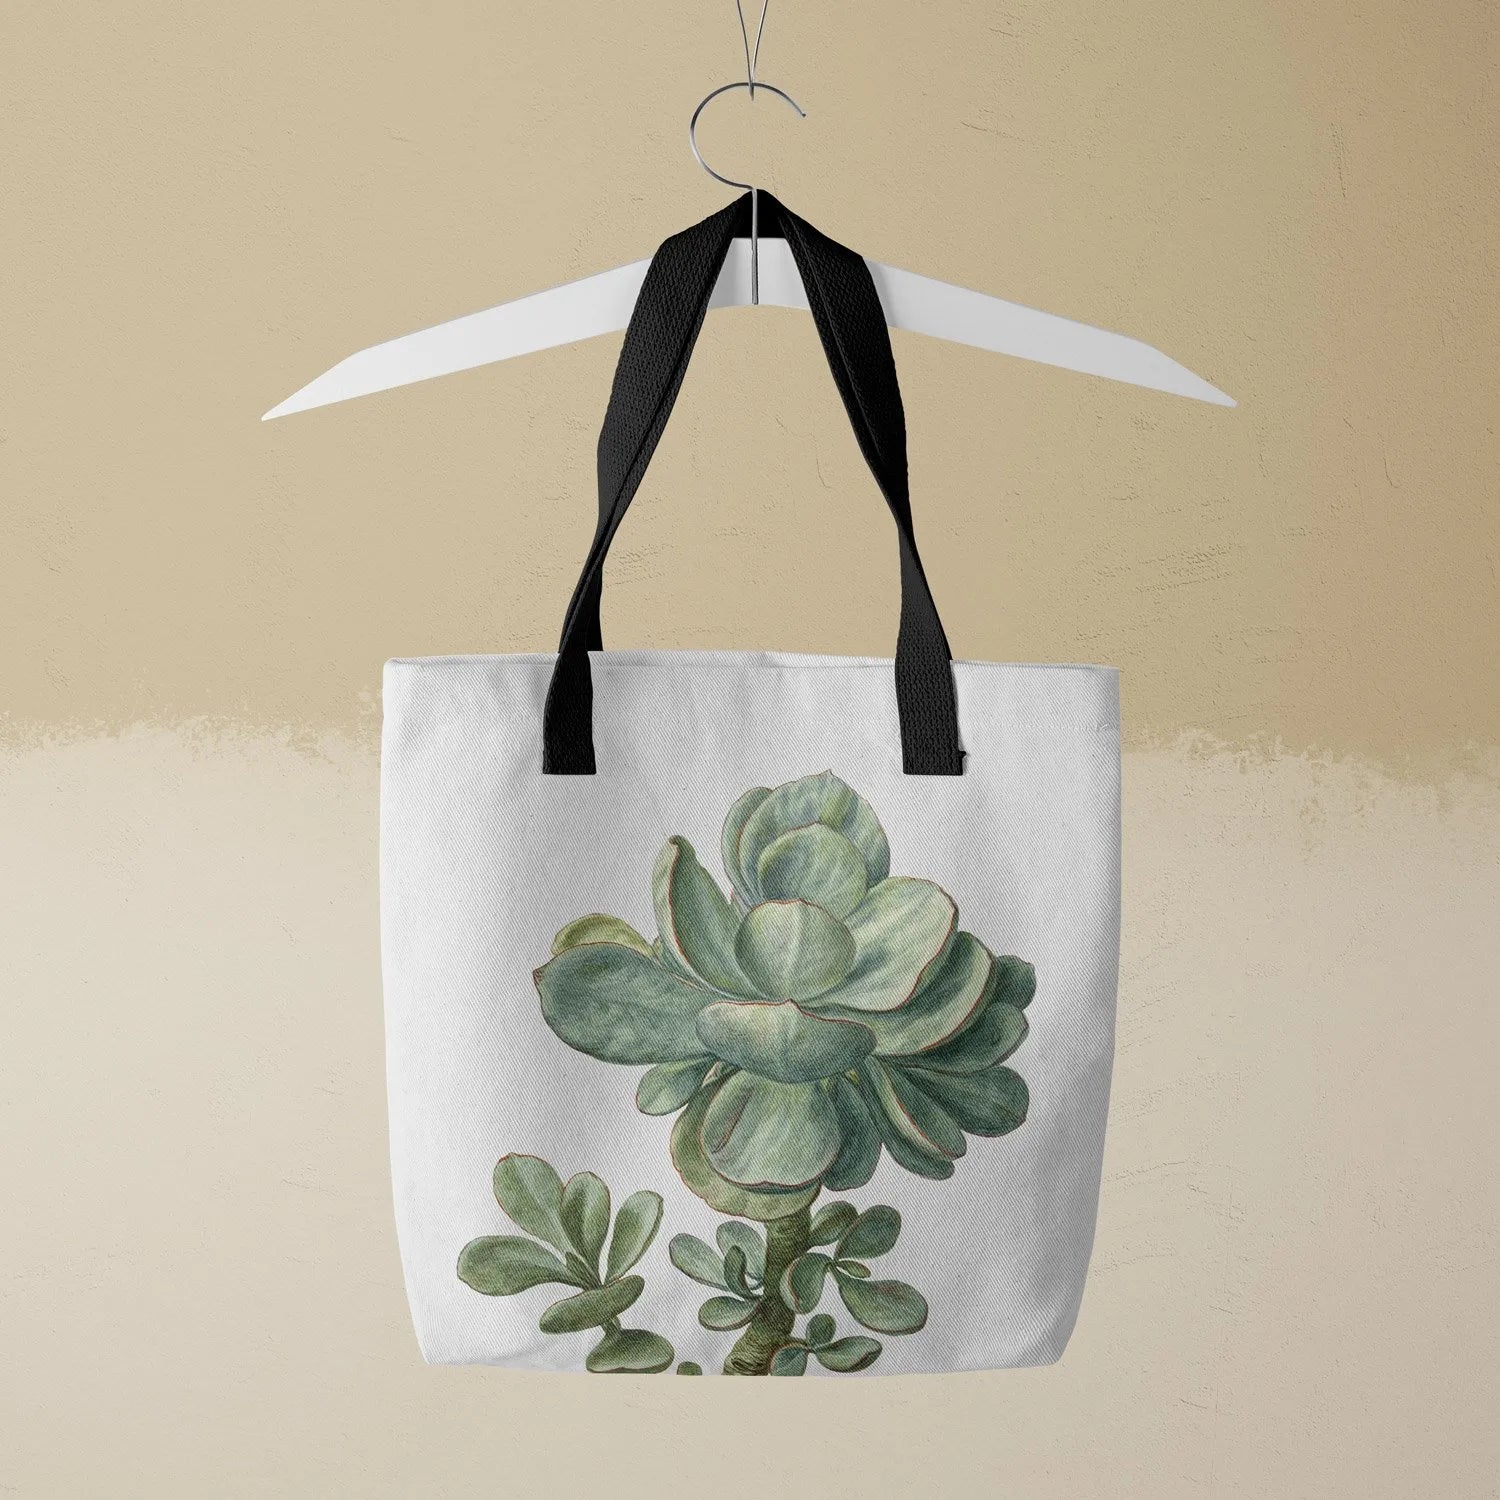 Little Green Man Tote - Silver Bullet - Heavy Duty Reusable Grocery Bag - Black Handles - Shopping Totes - Aesthetic Art